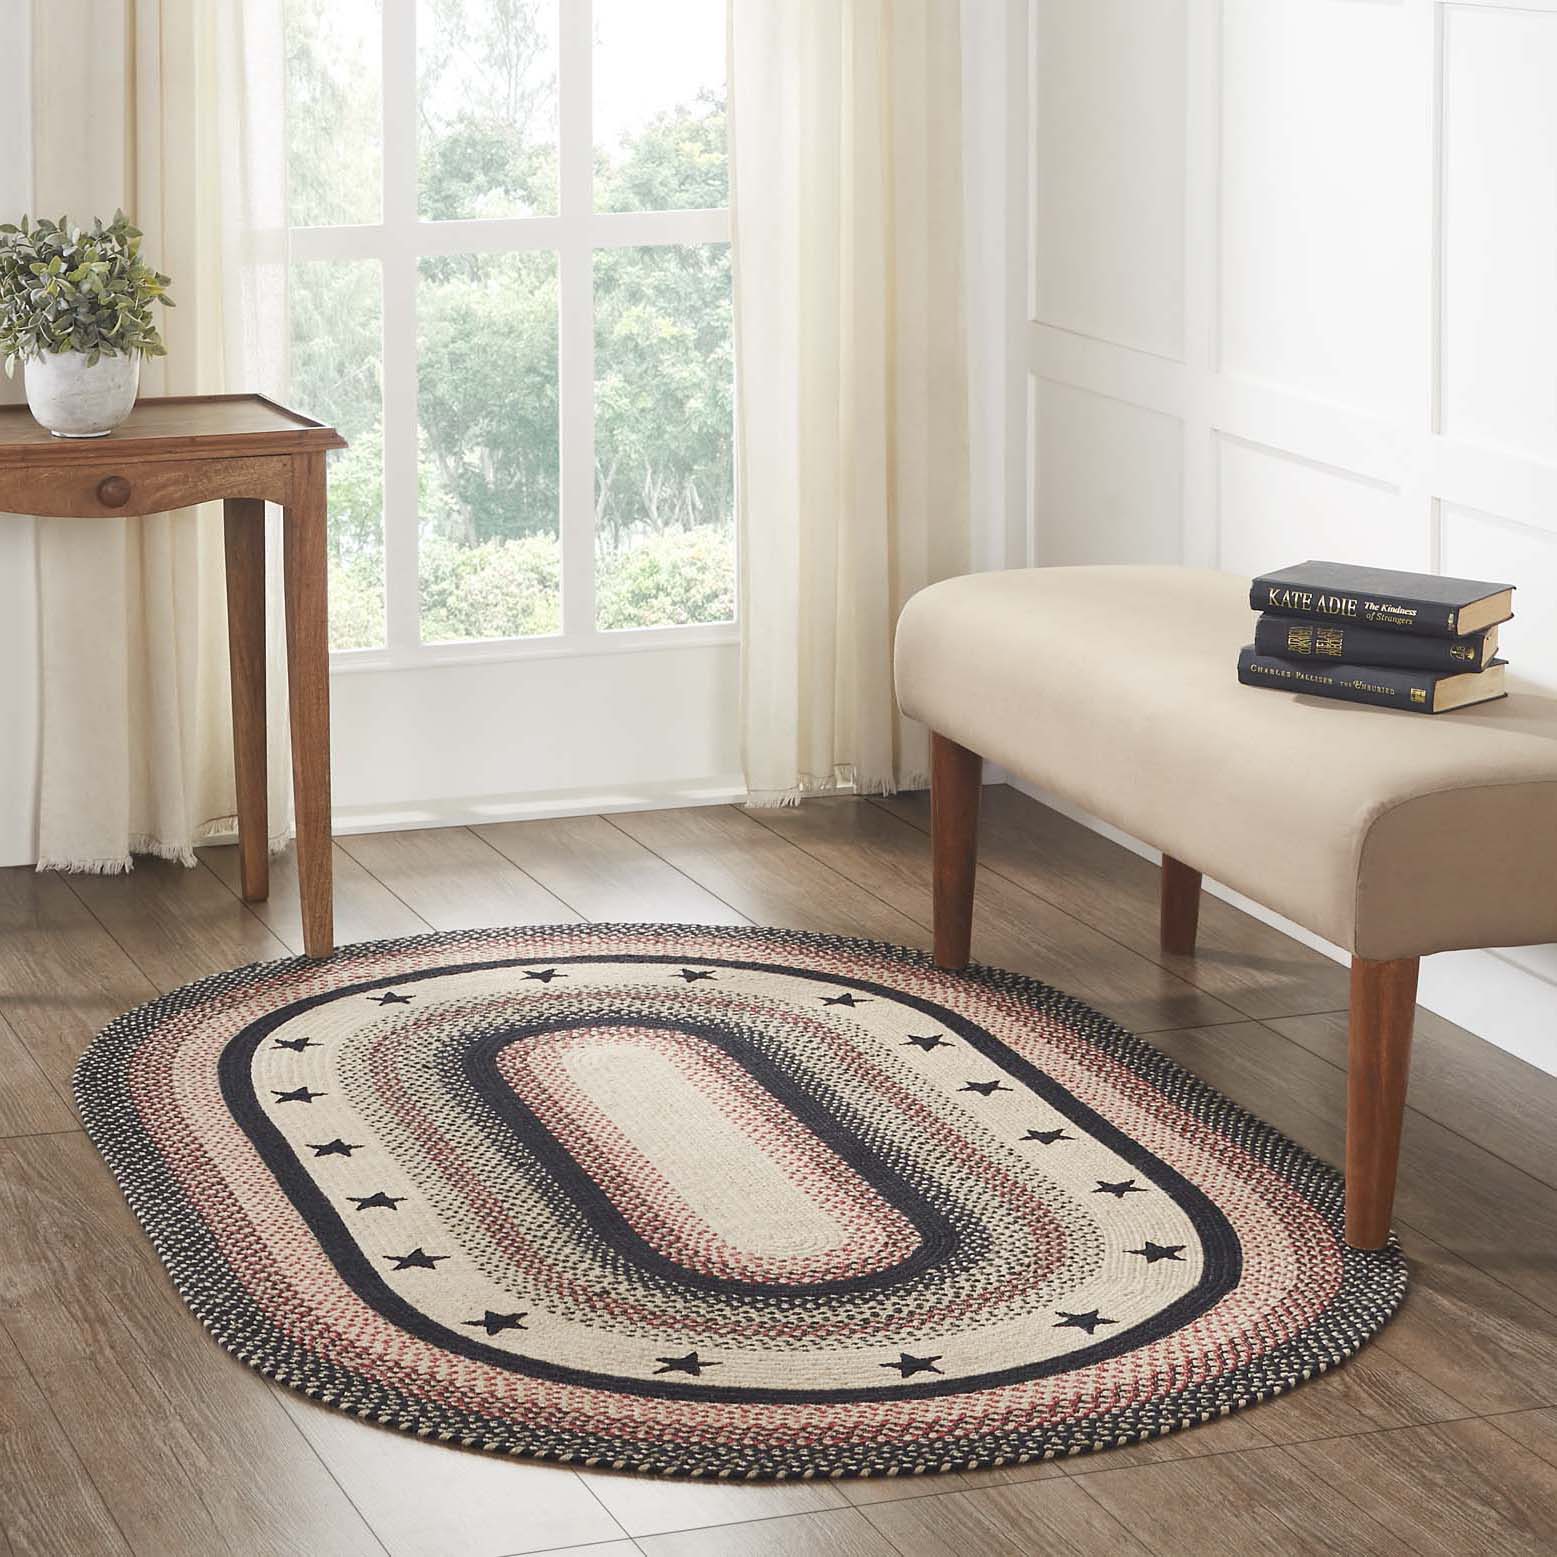 Colonial Star Jute Braided Rug Oval with Rug Pad 4'x6' VHC Brands